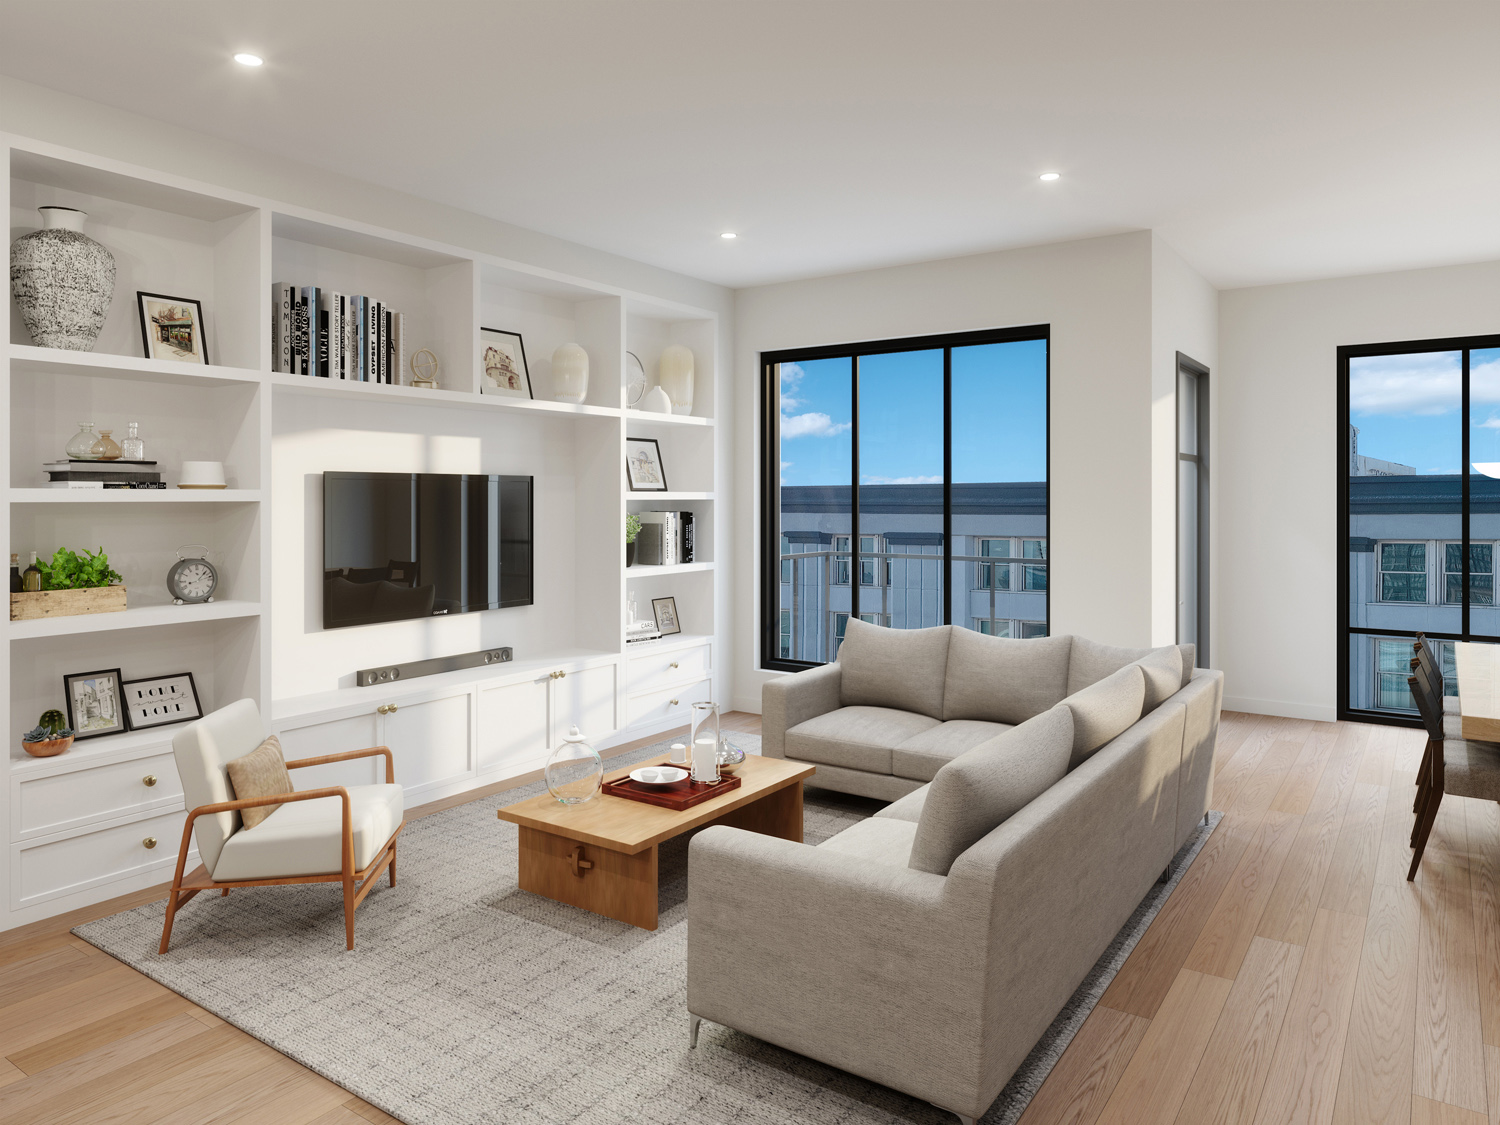 Interior View at CA6 Condos. Rendering by SGW Architecture